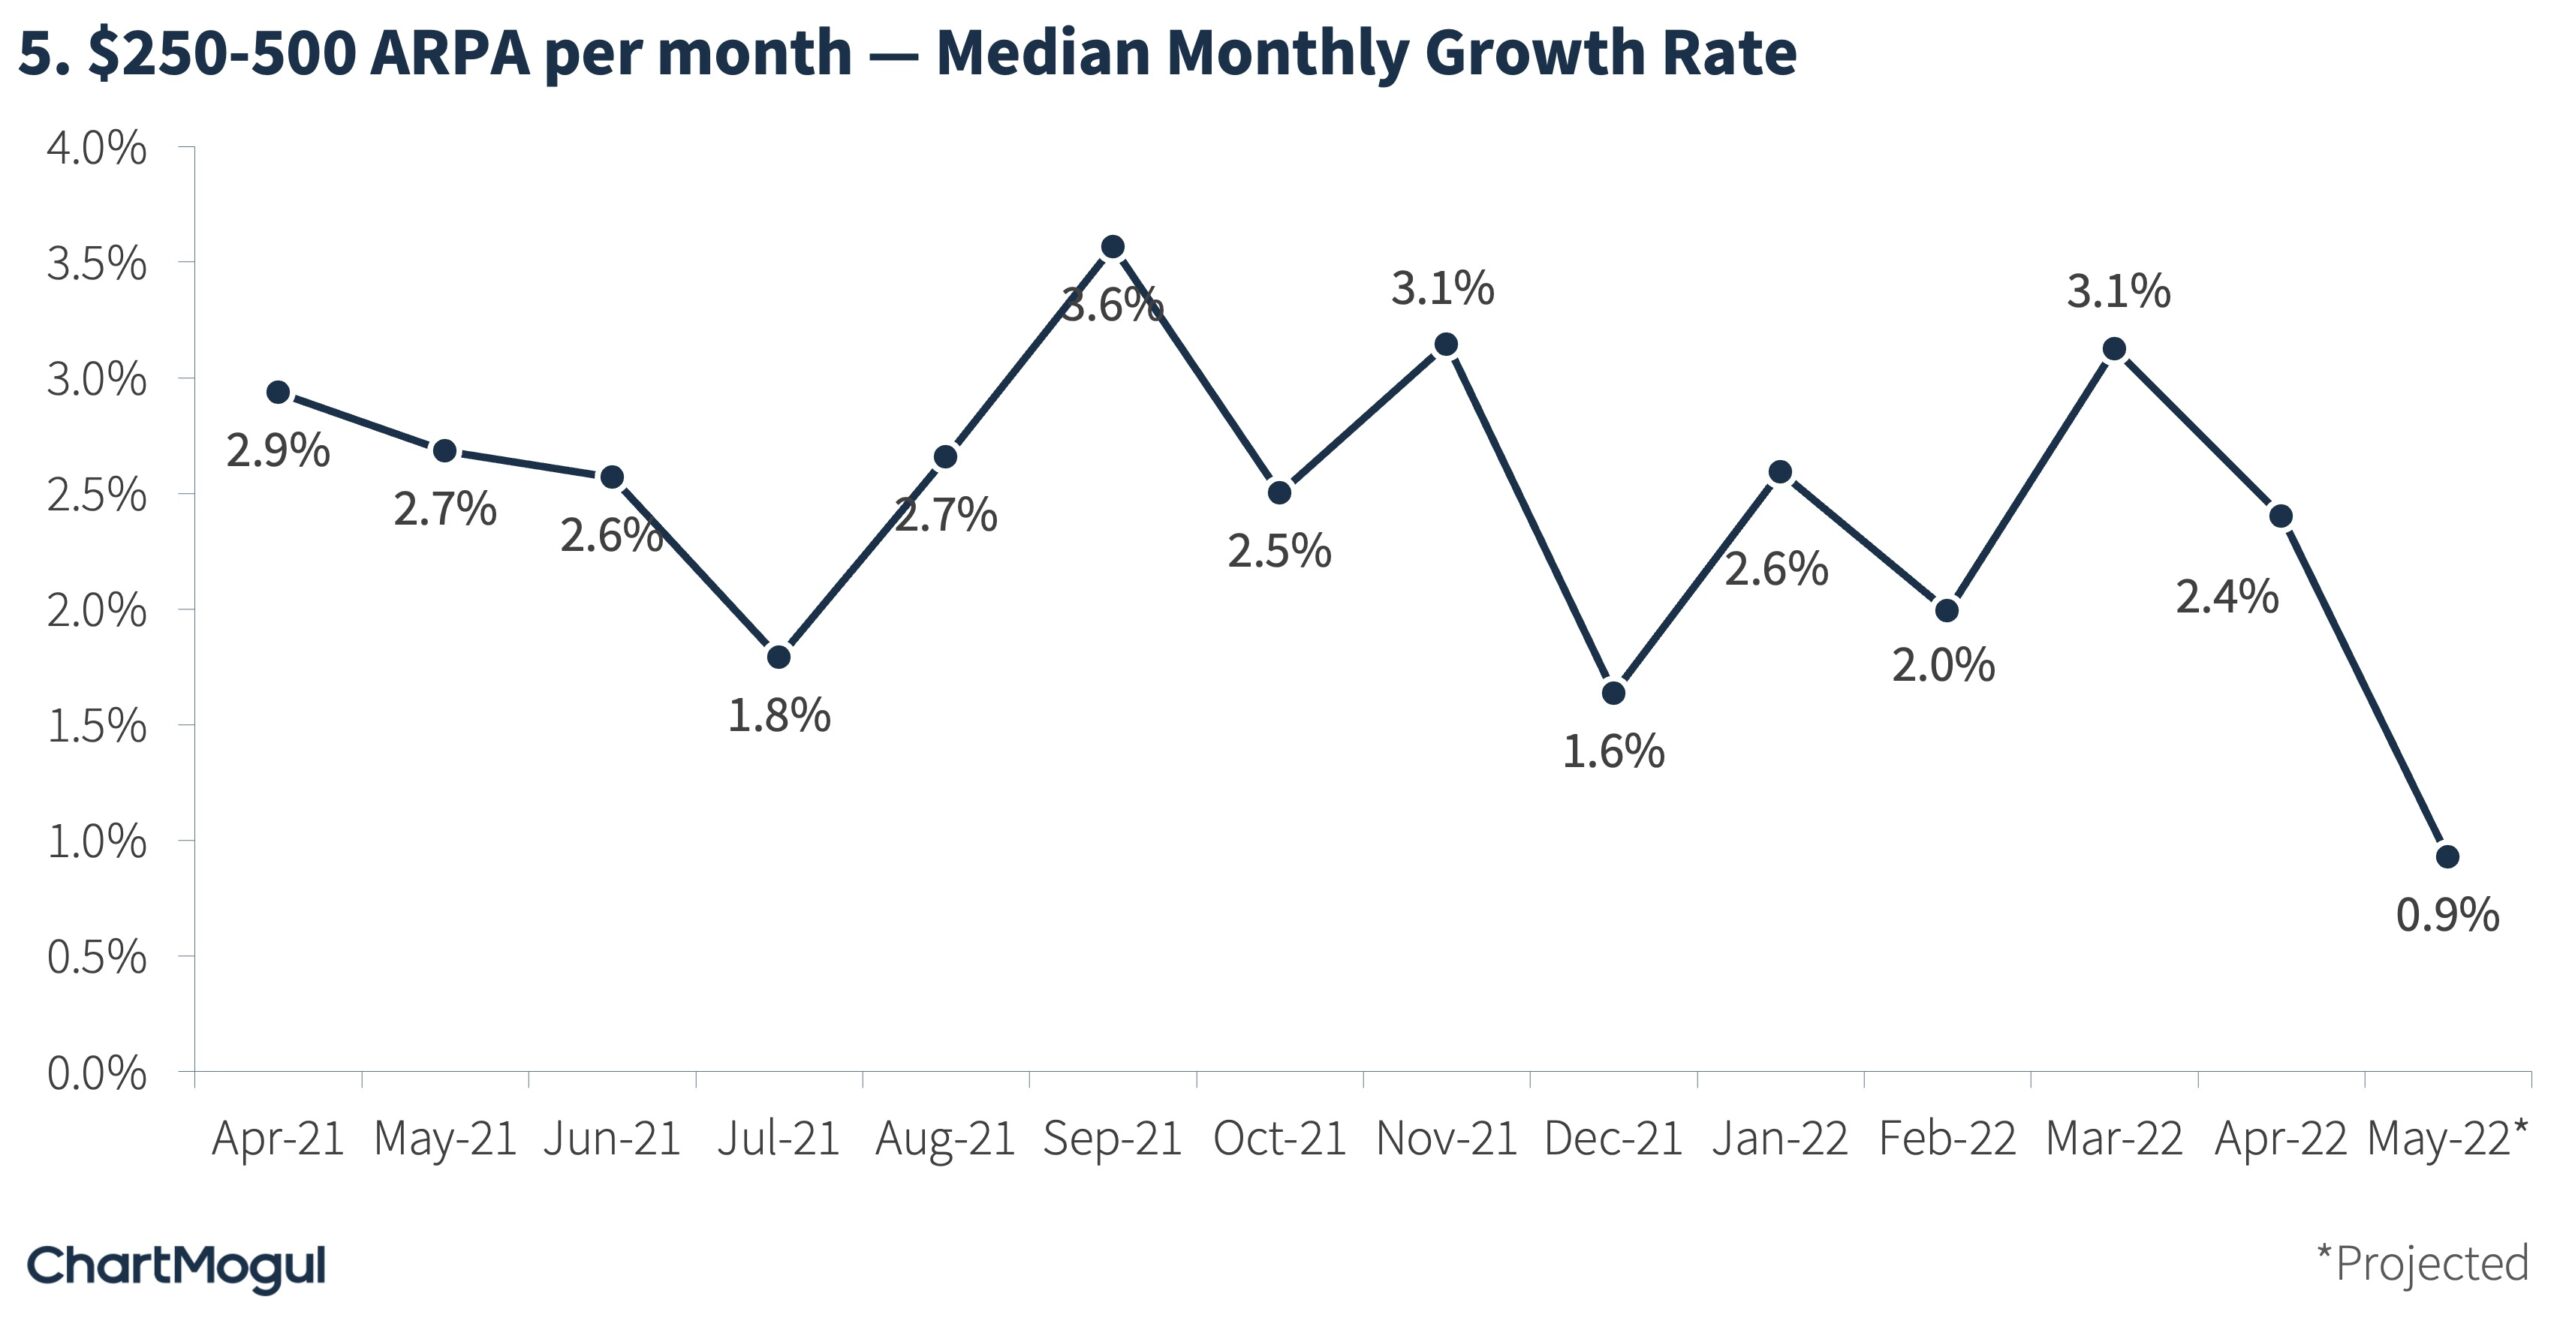 $250 -500 ARPA Median Monthly Growth Rate